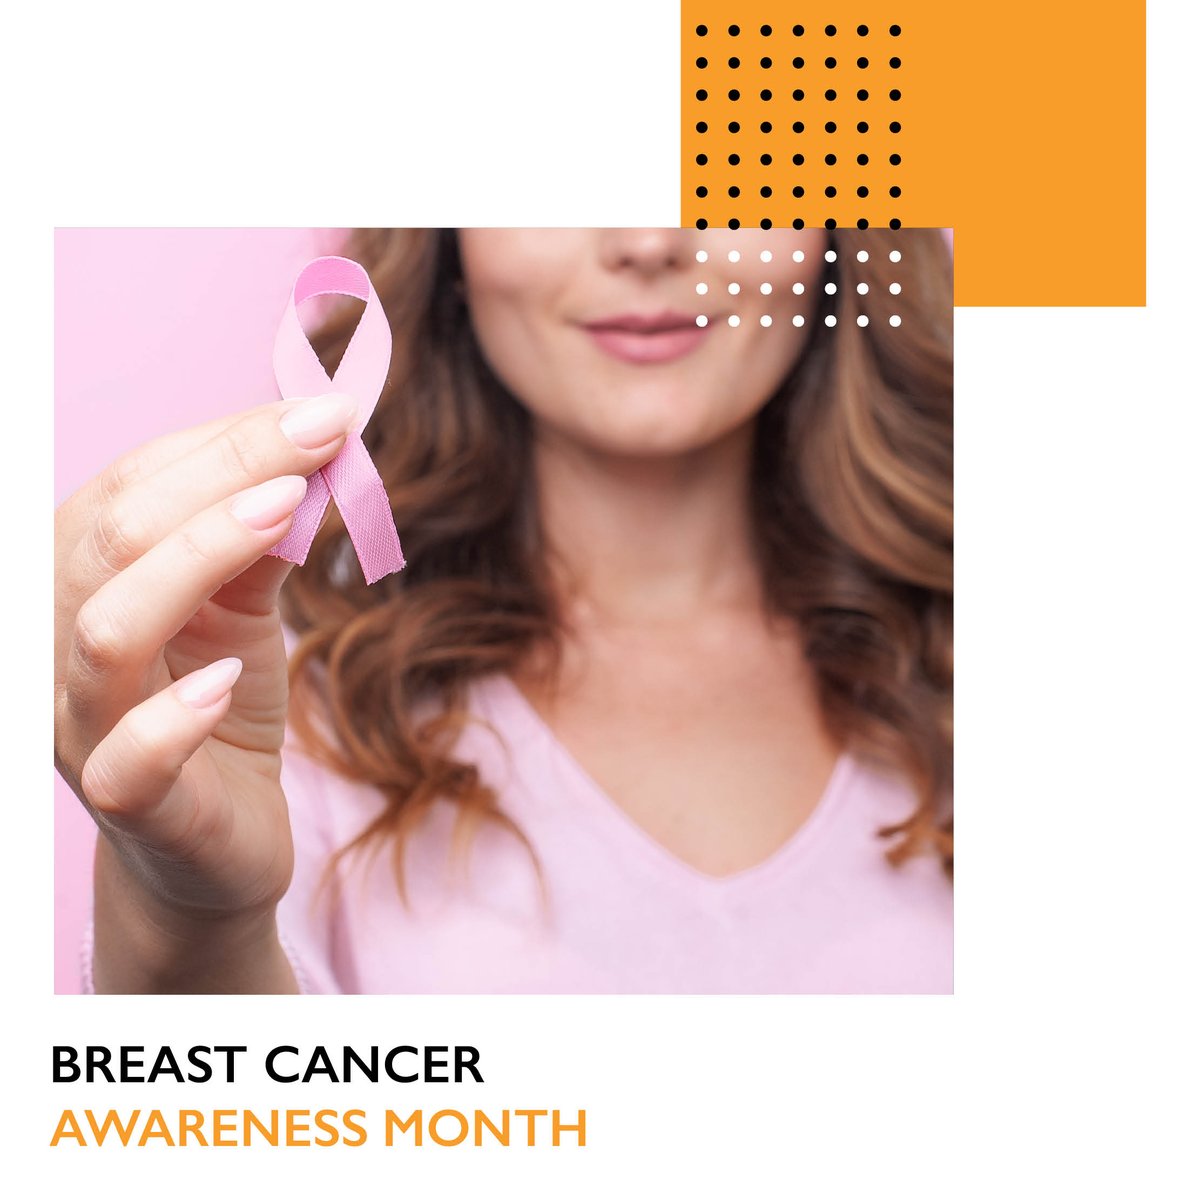 October is #breastcancerawreness month, so lets get talking, remember early detection is key to prevention.
#hotelroom #hmhhotelgroup #amman #corpamman #jordan #health #breastcancer #breastcancerawreness